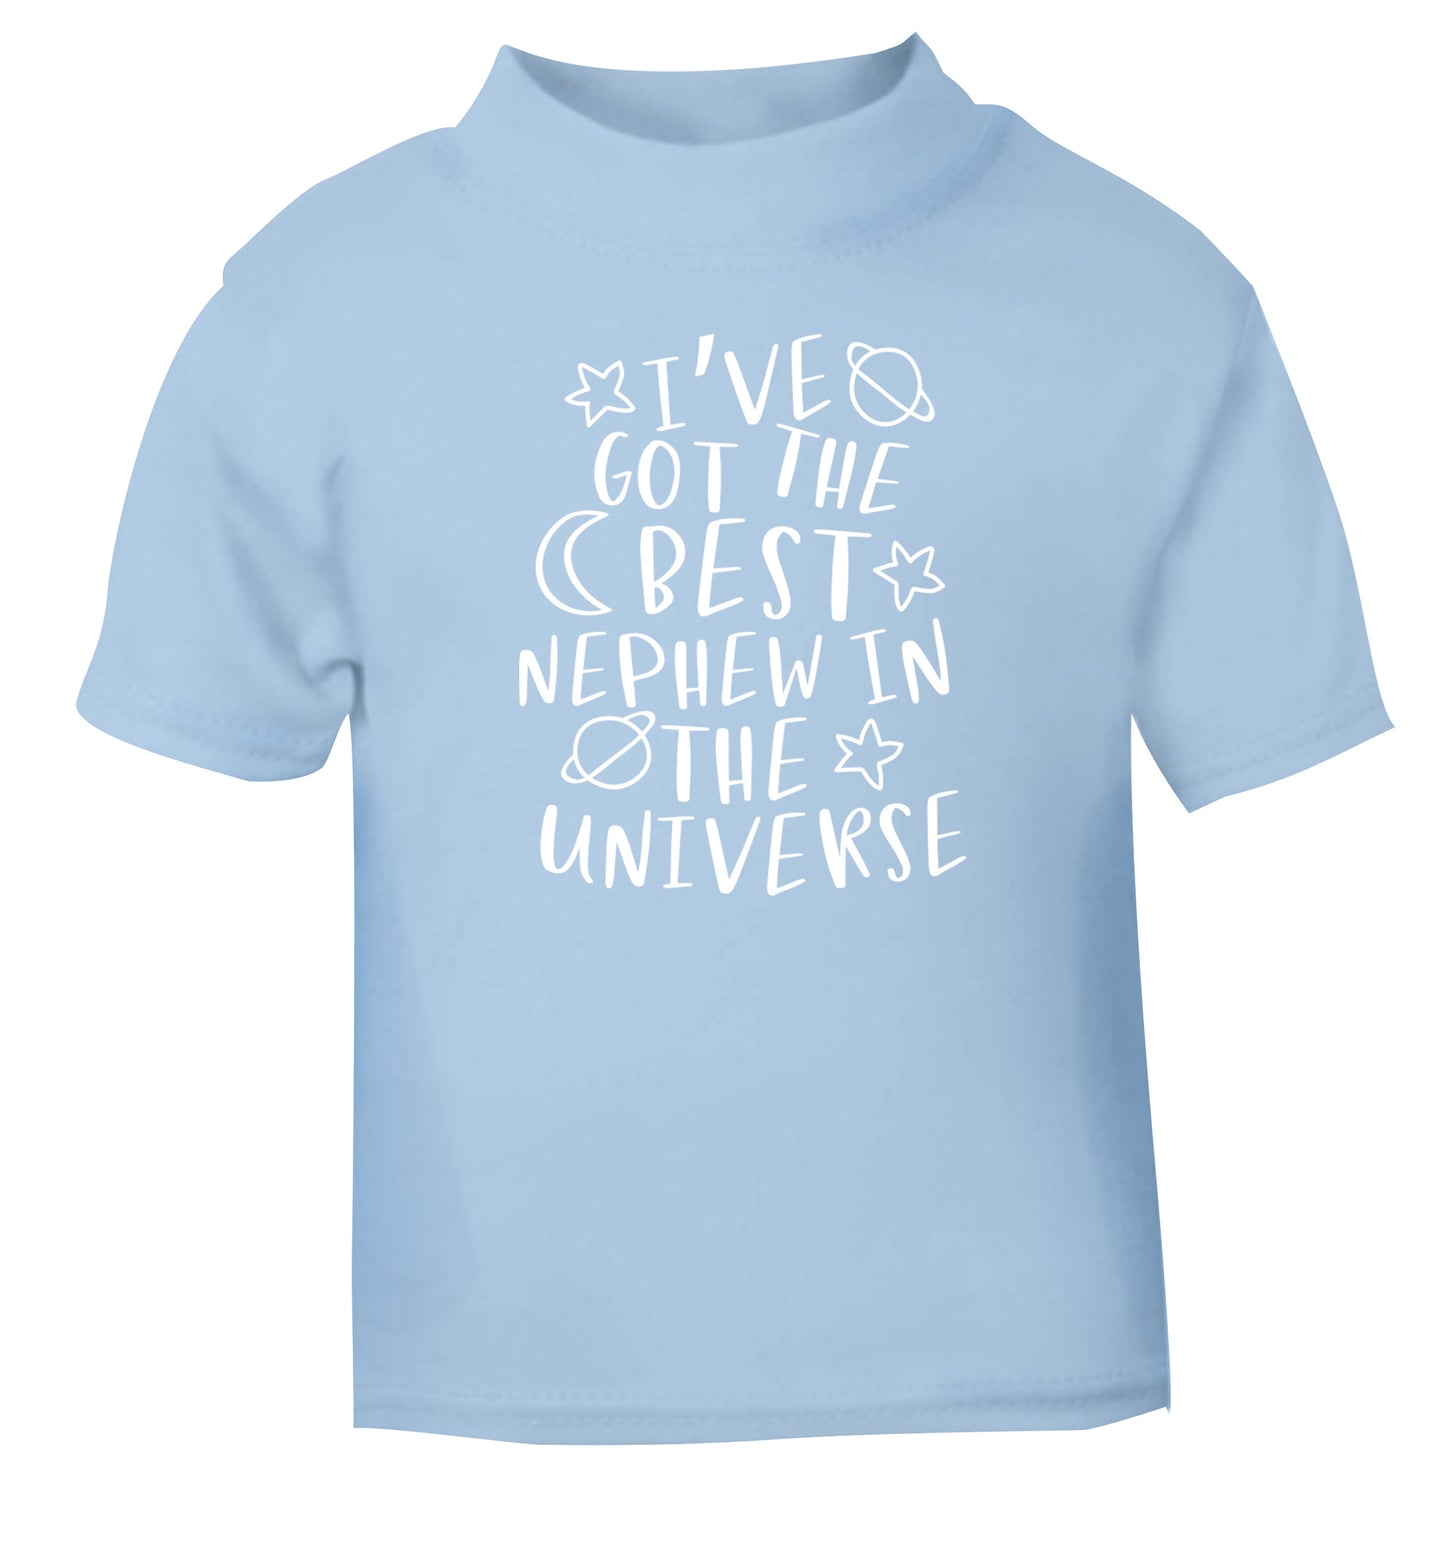 I've got the best nephew in the universe light blue Baby Toddler Tshirt 2 Years